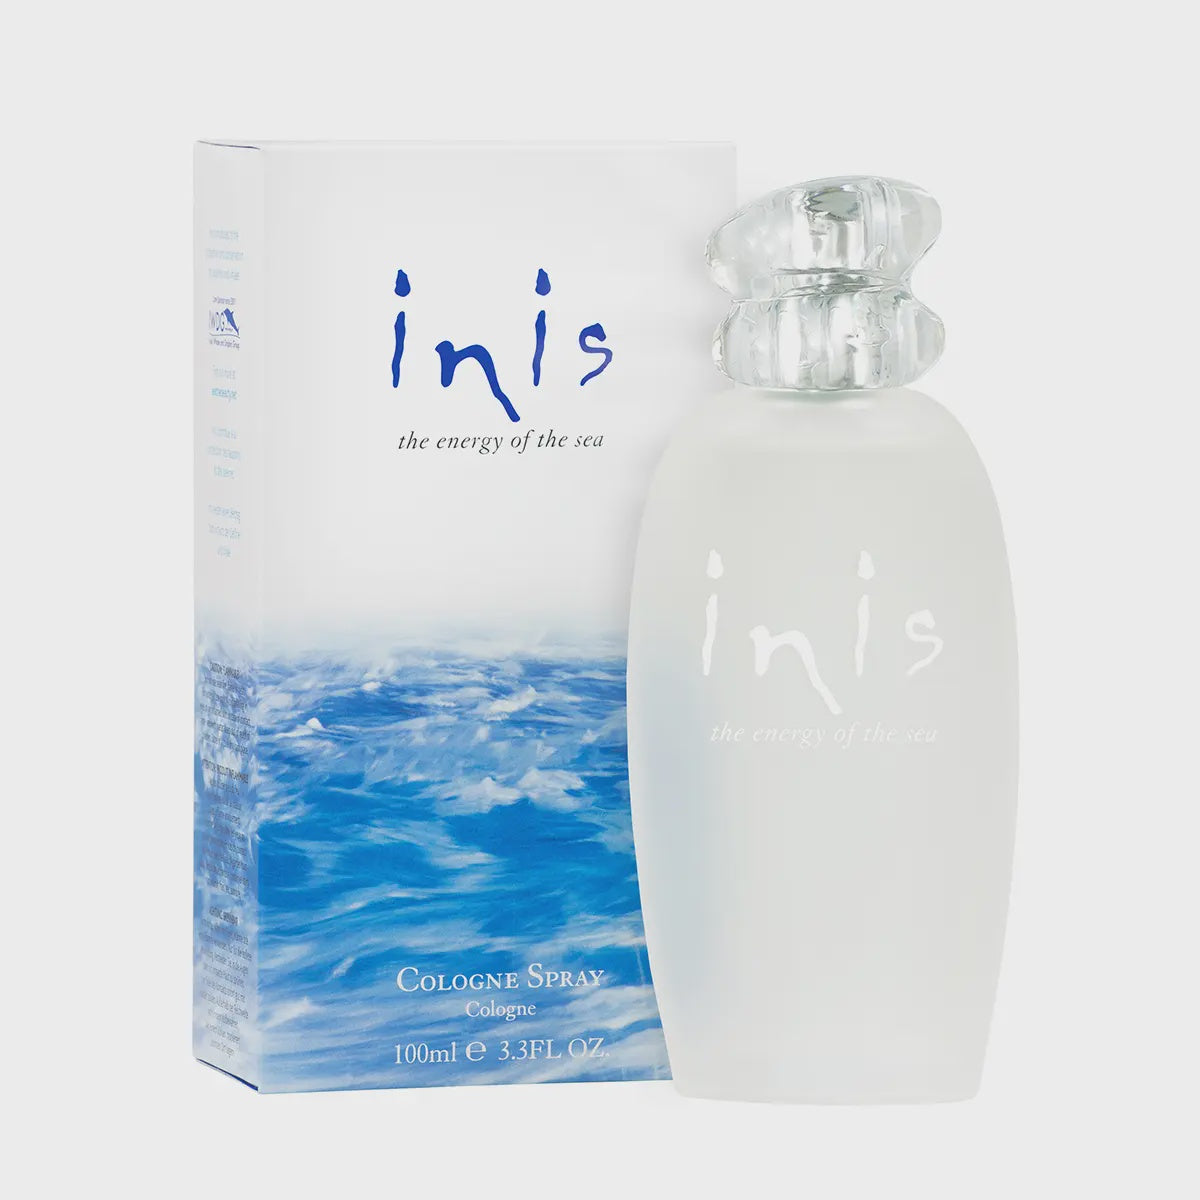 Buy Inis Cologne Spray Fragrance 100ml at Southend stockist Under the Sun shop